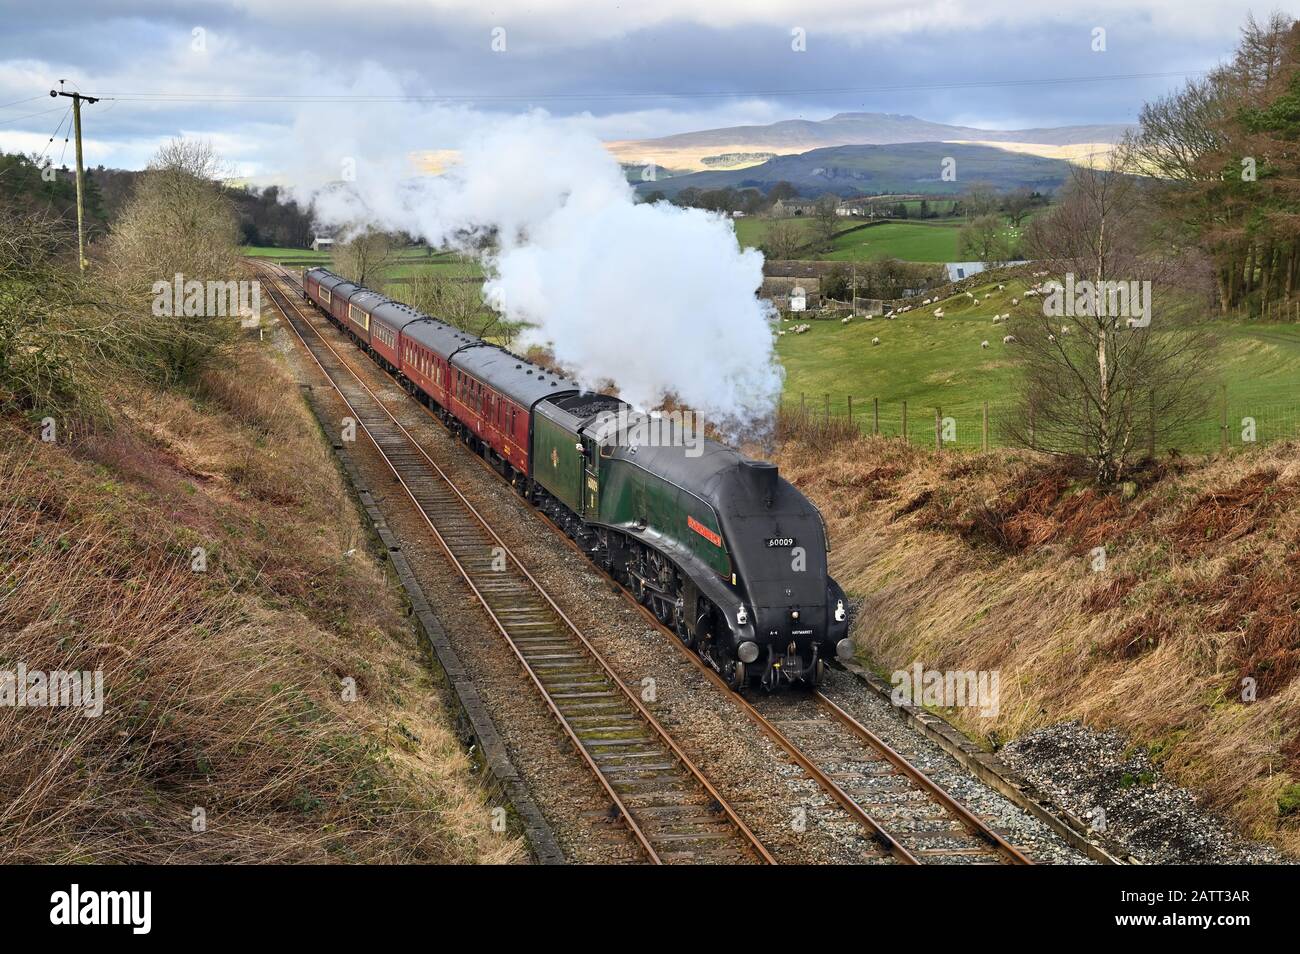 A4 class steam locomotive Union of South Africa on a test run from Carnforth, seen here at Giggleswick summit near Settle, North Yorkshire. Stock Photo